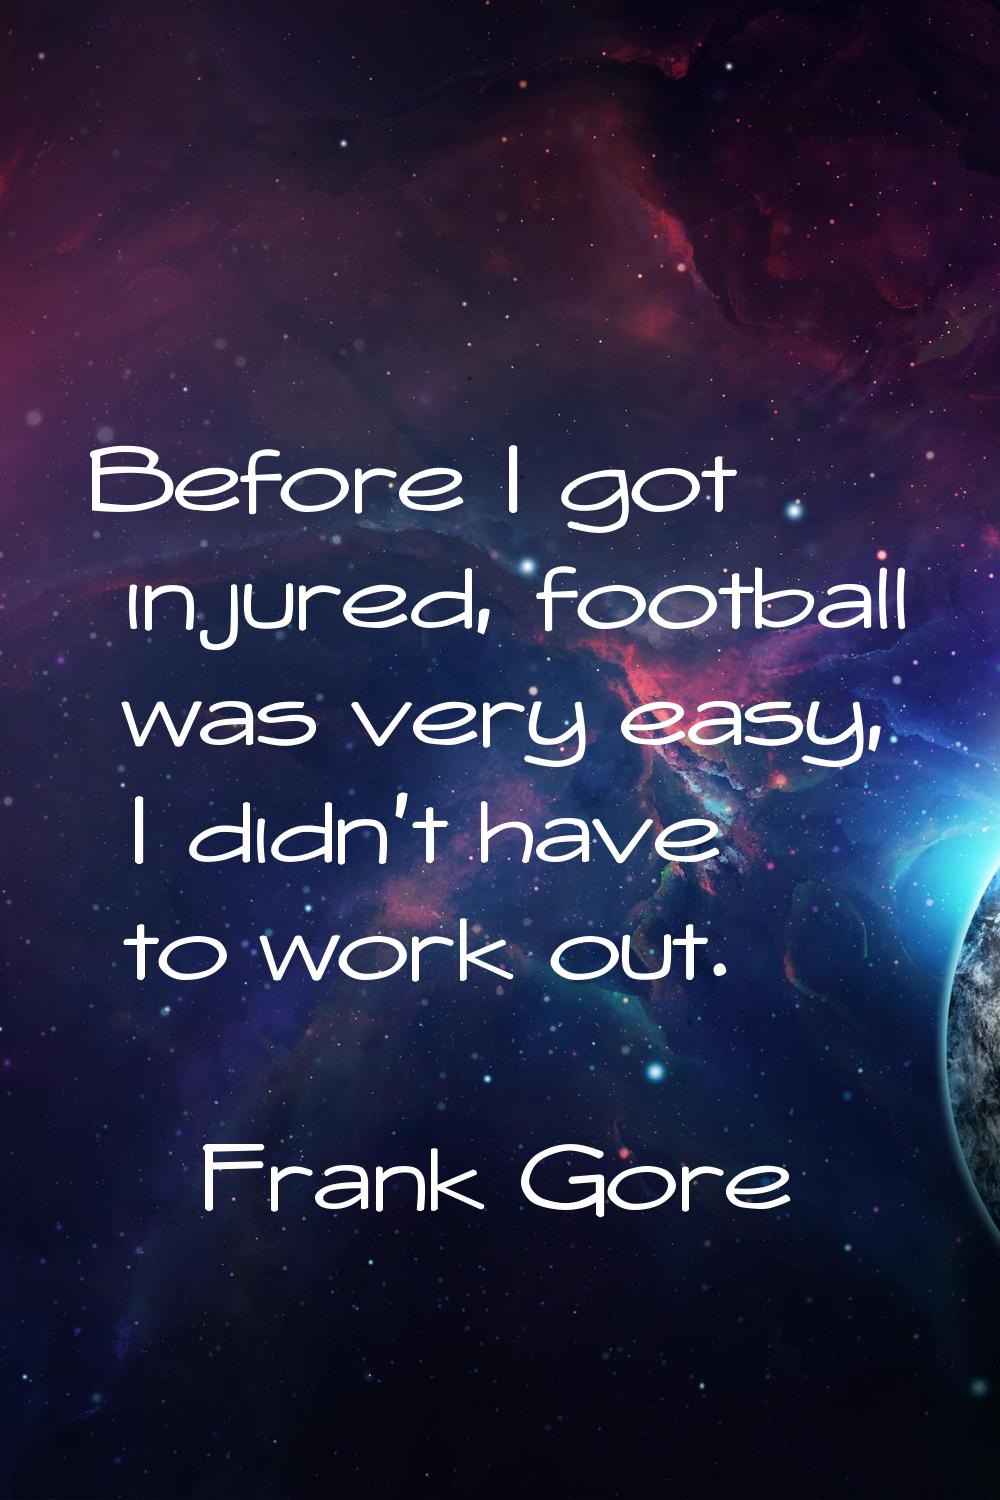 Before I got injured, football was very easy, I didn't have to work out.